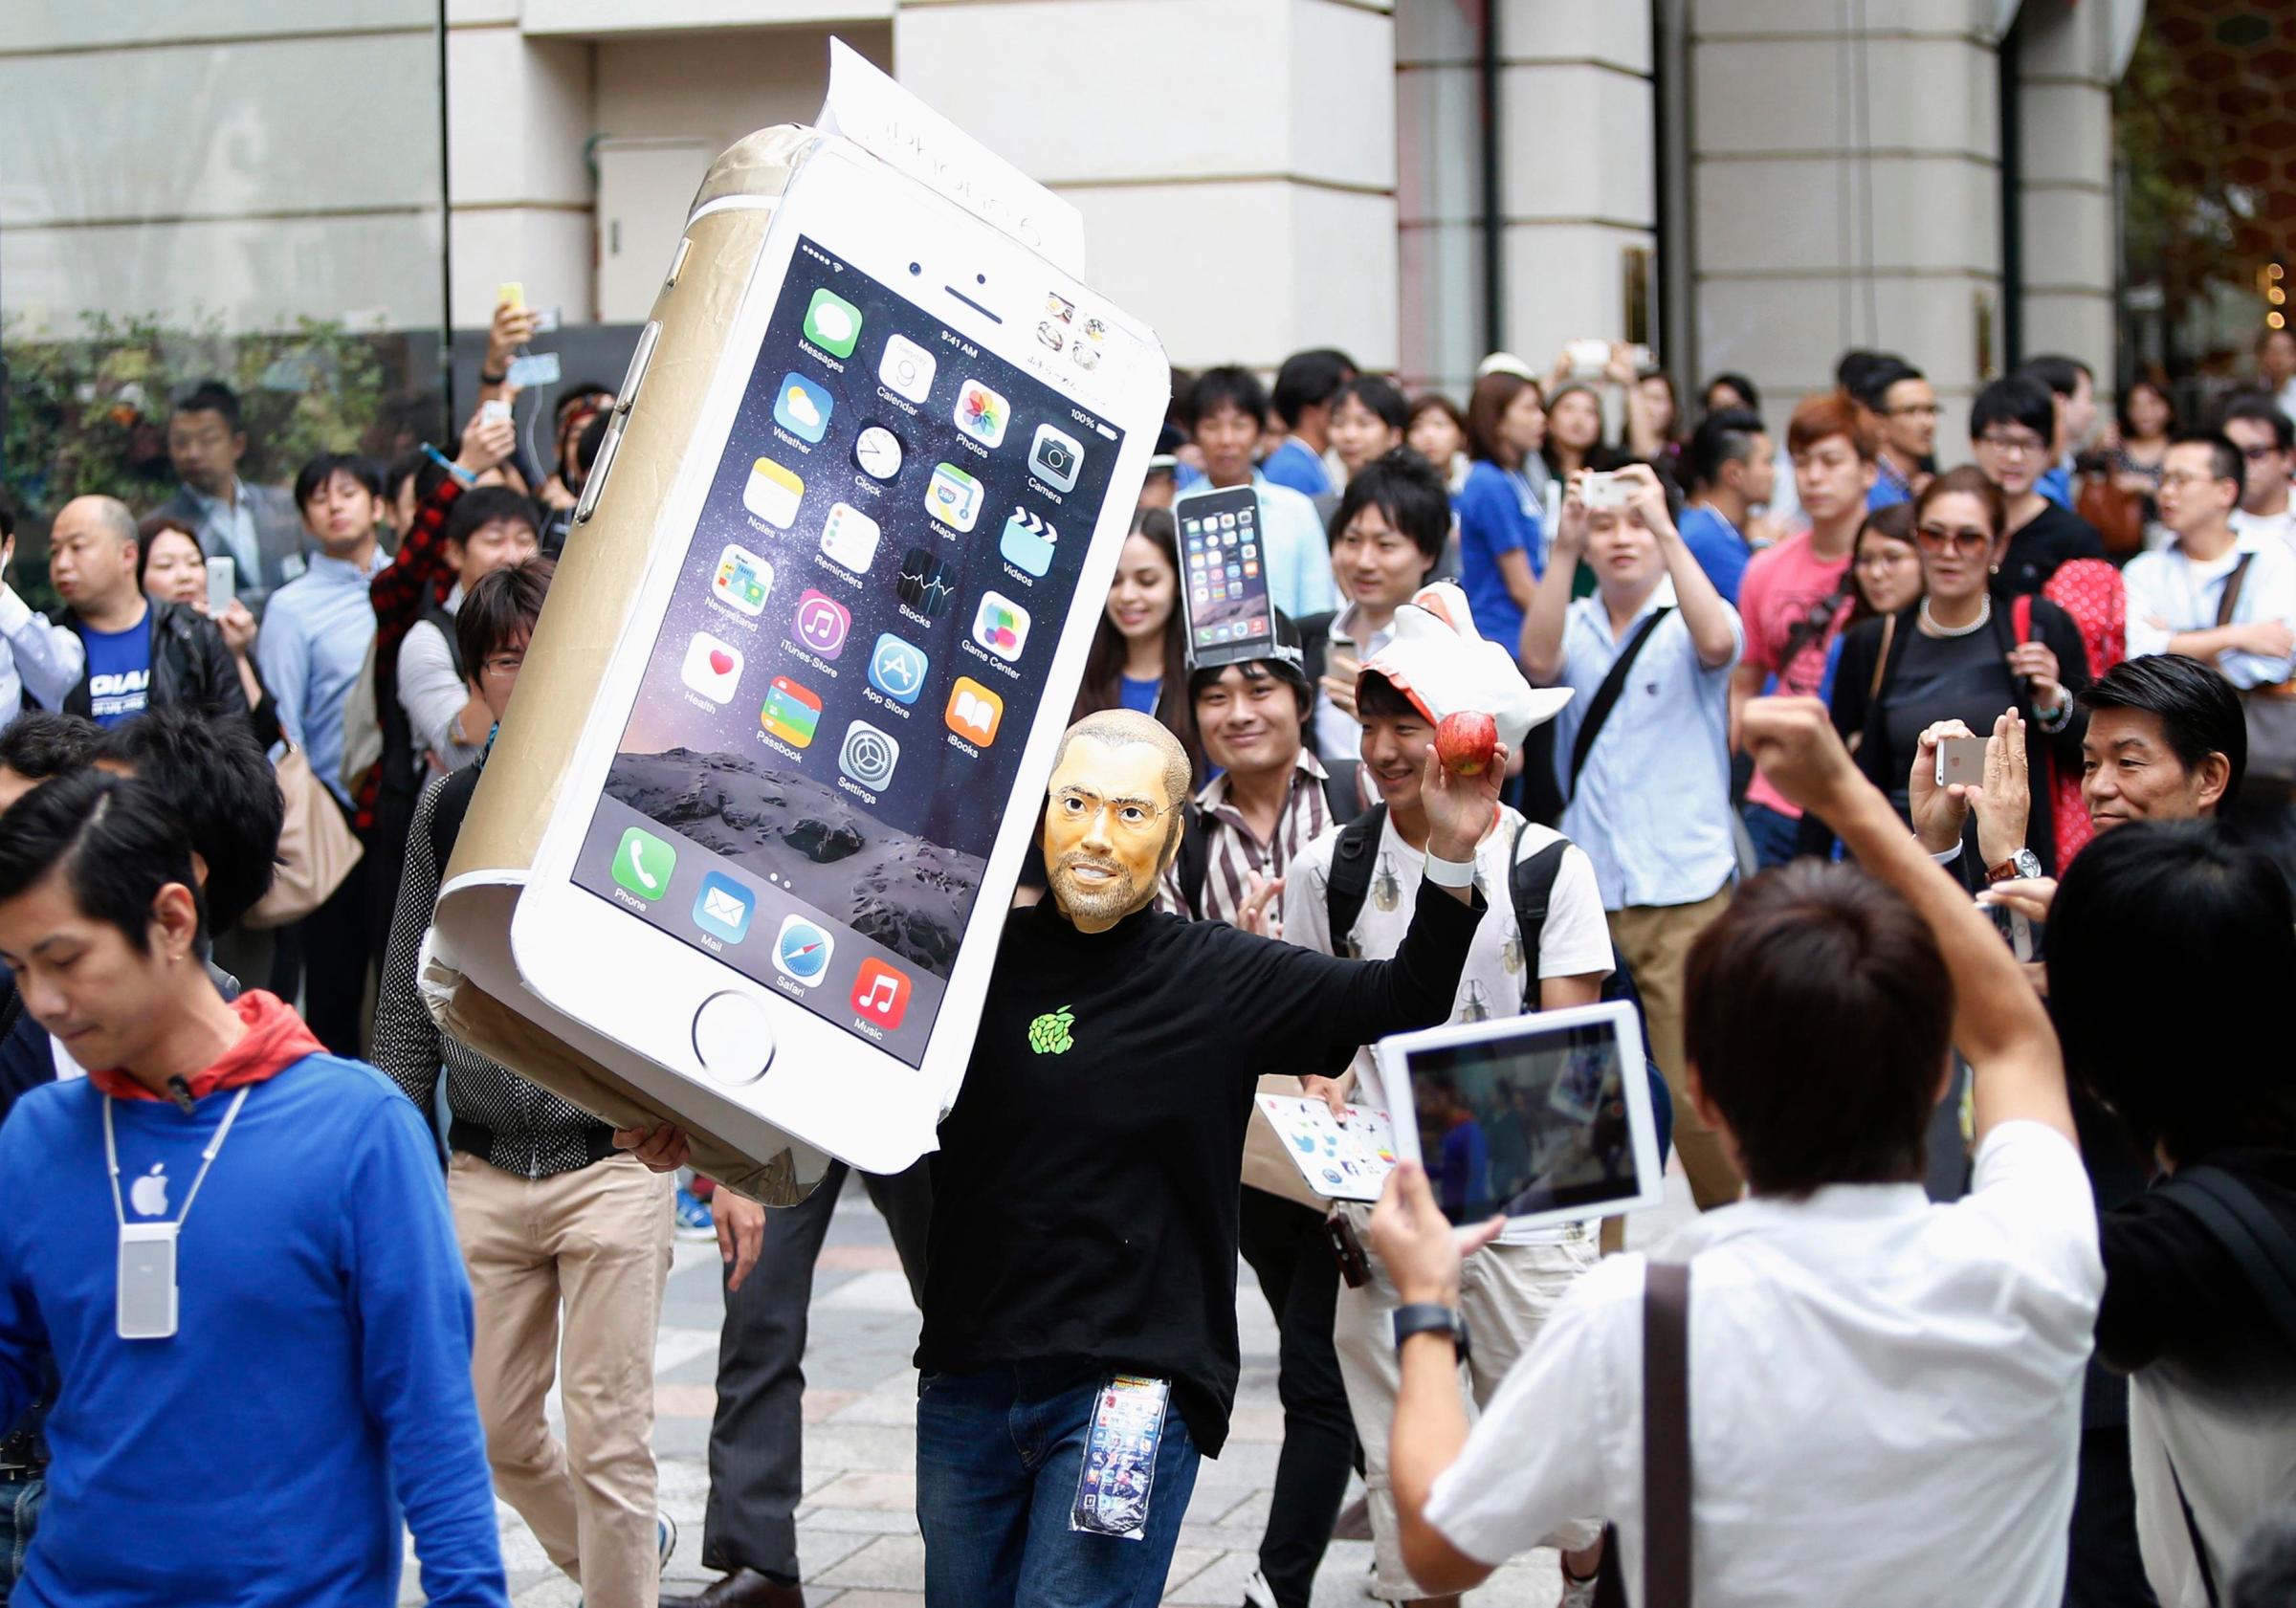 A man wearingaA man wearing a mask depicting Apple's co-founder Steve Jobs holds up a cardboard cut-out of Apple's new iPhone 6, as he walks into the Apple Store in Tokyo on Sept. 18, 2014. a mask depicting Steve Jobs holds up a cardboard cut-out of Apple's new iPhone 6, as he walks into the Apple Store in Tokyo